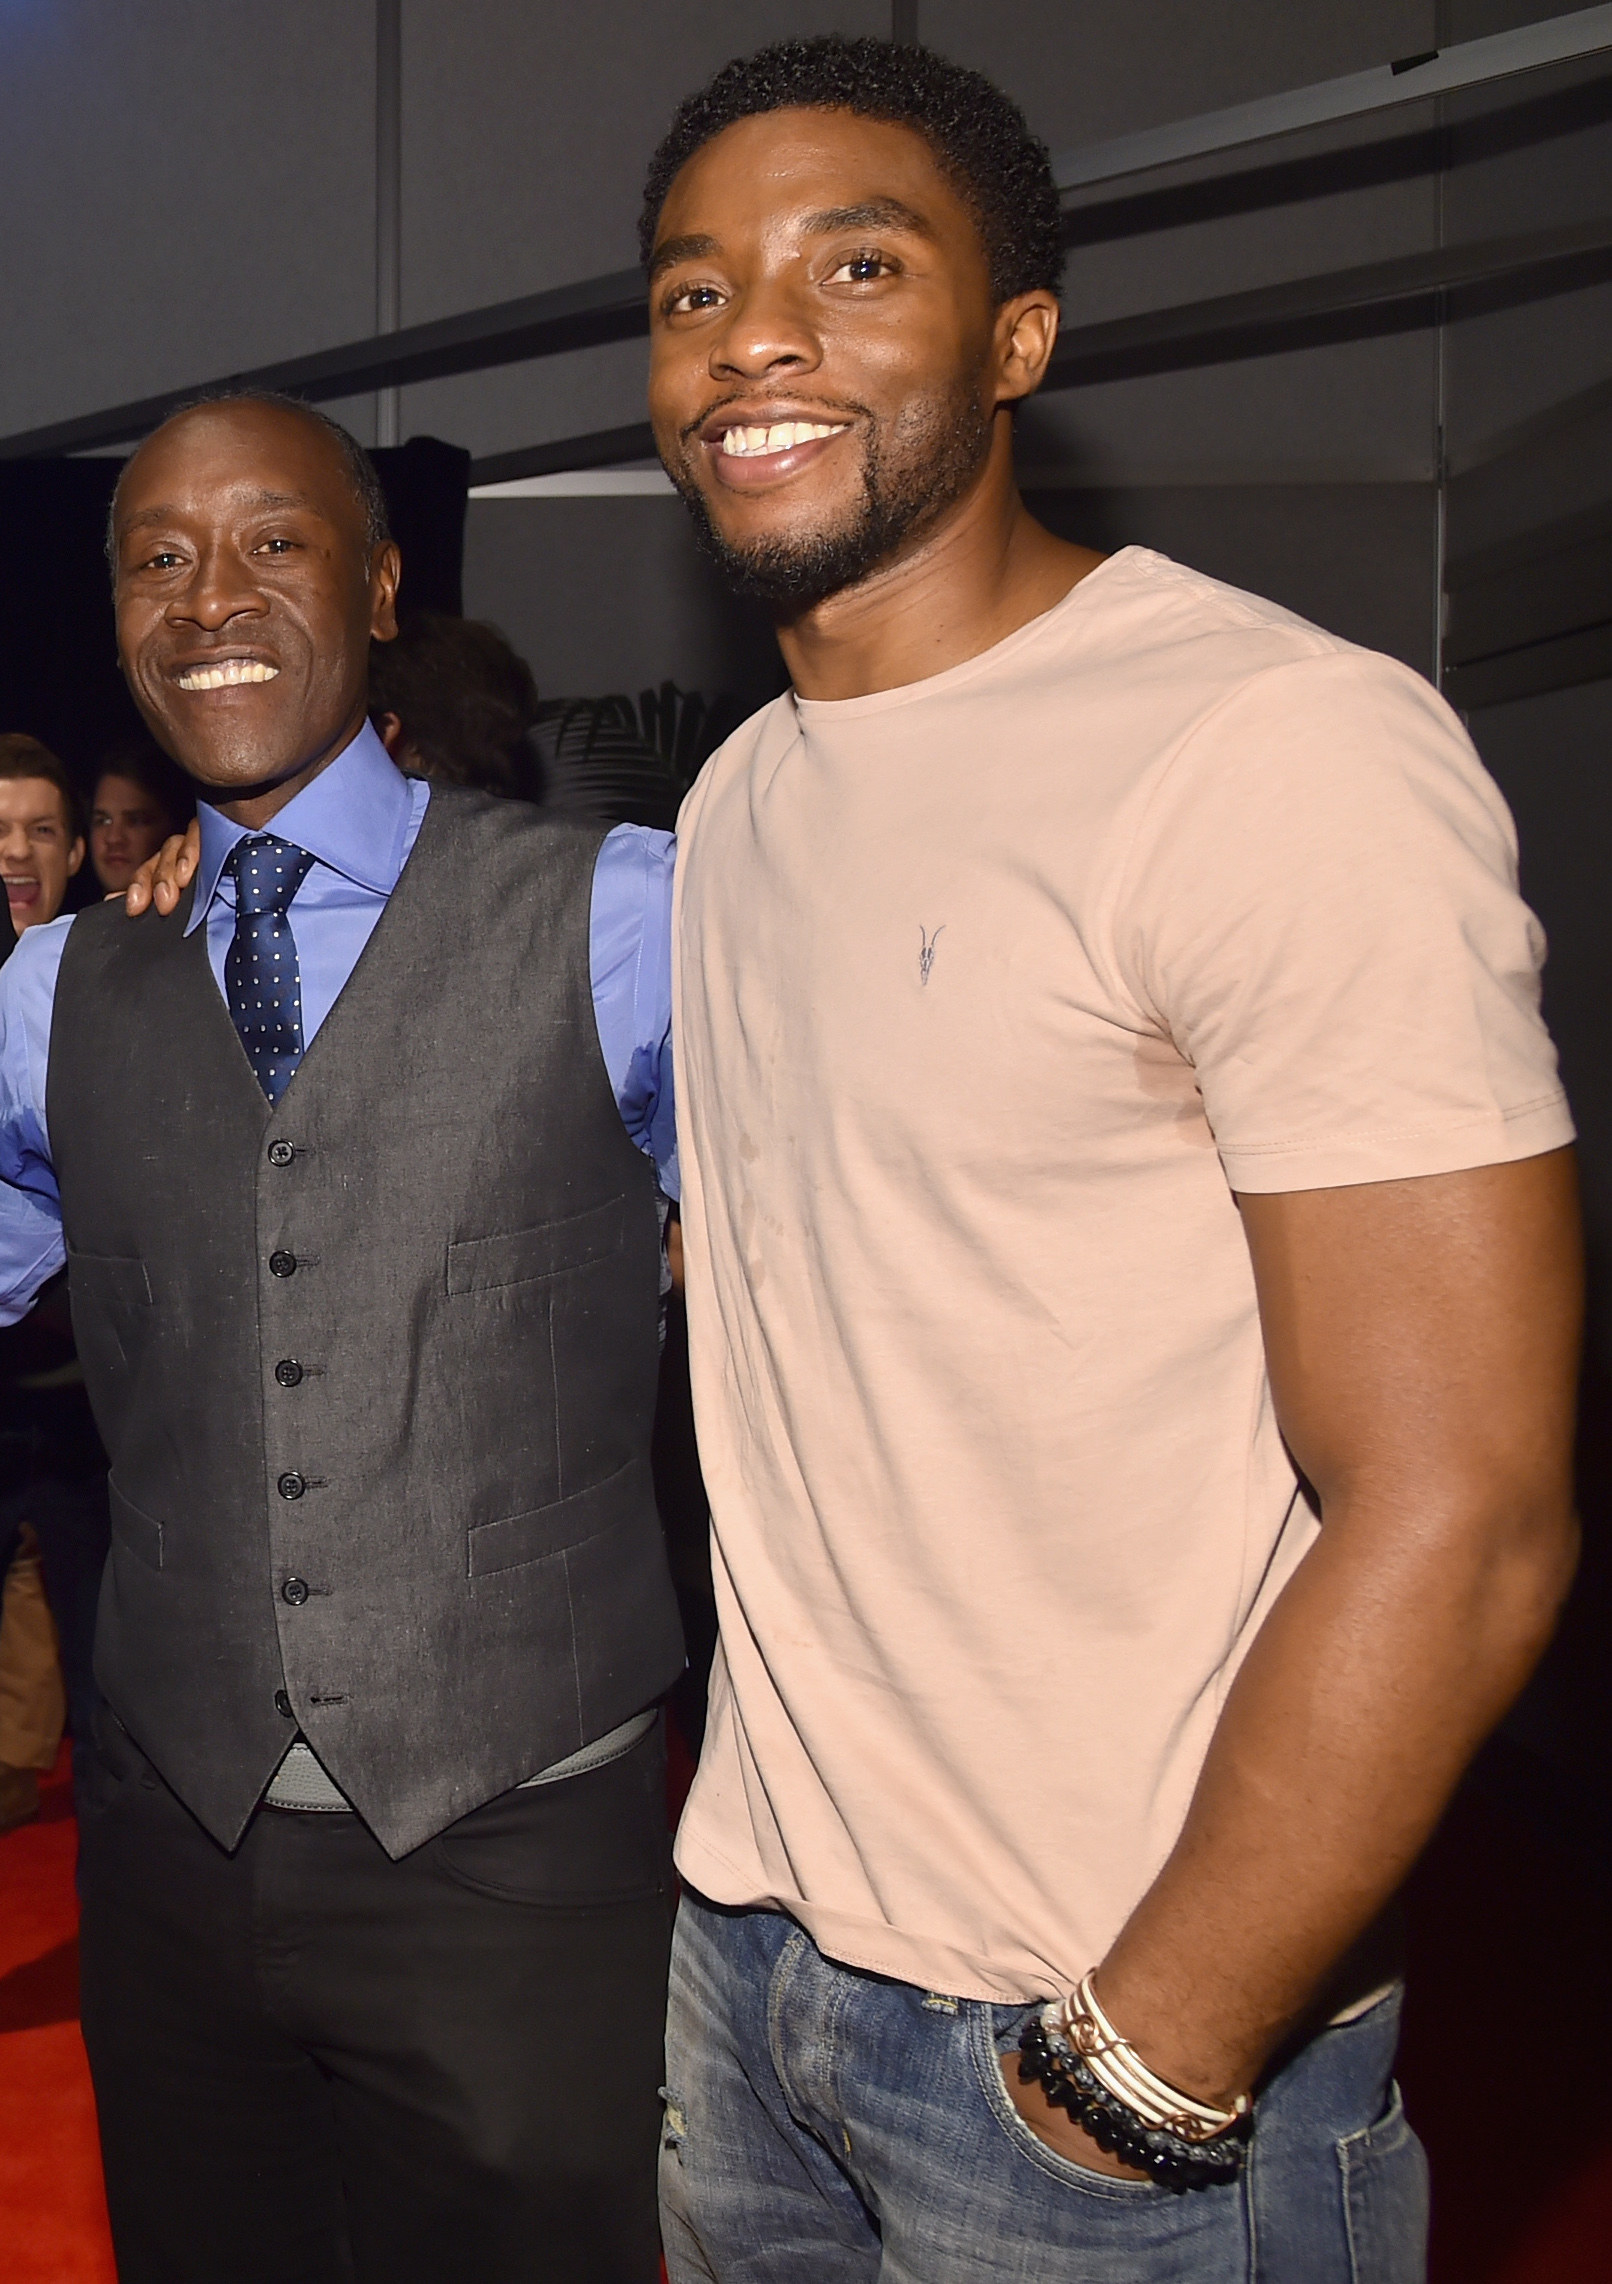 Don Cheadle and Chadwick Boseman pose together for a photo